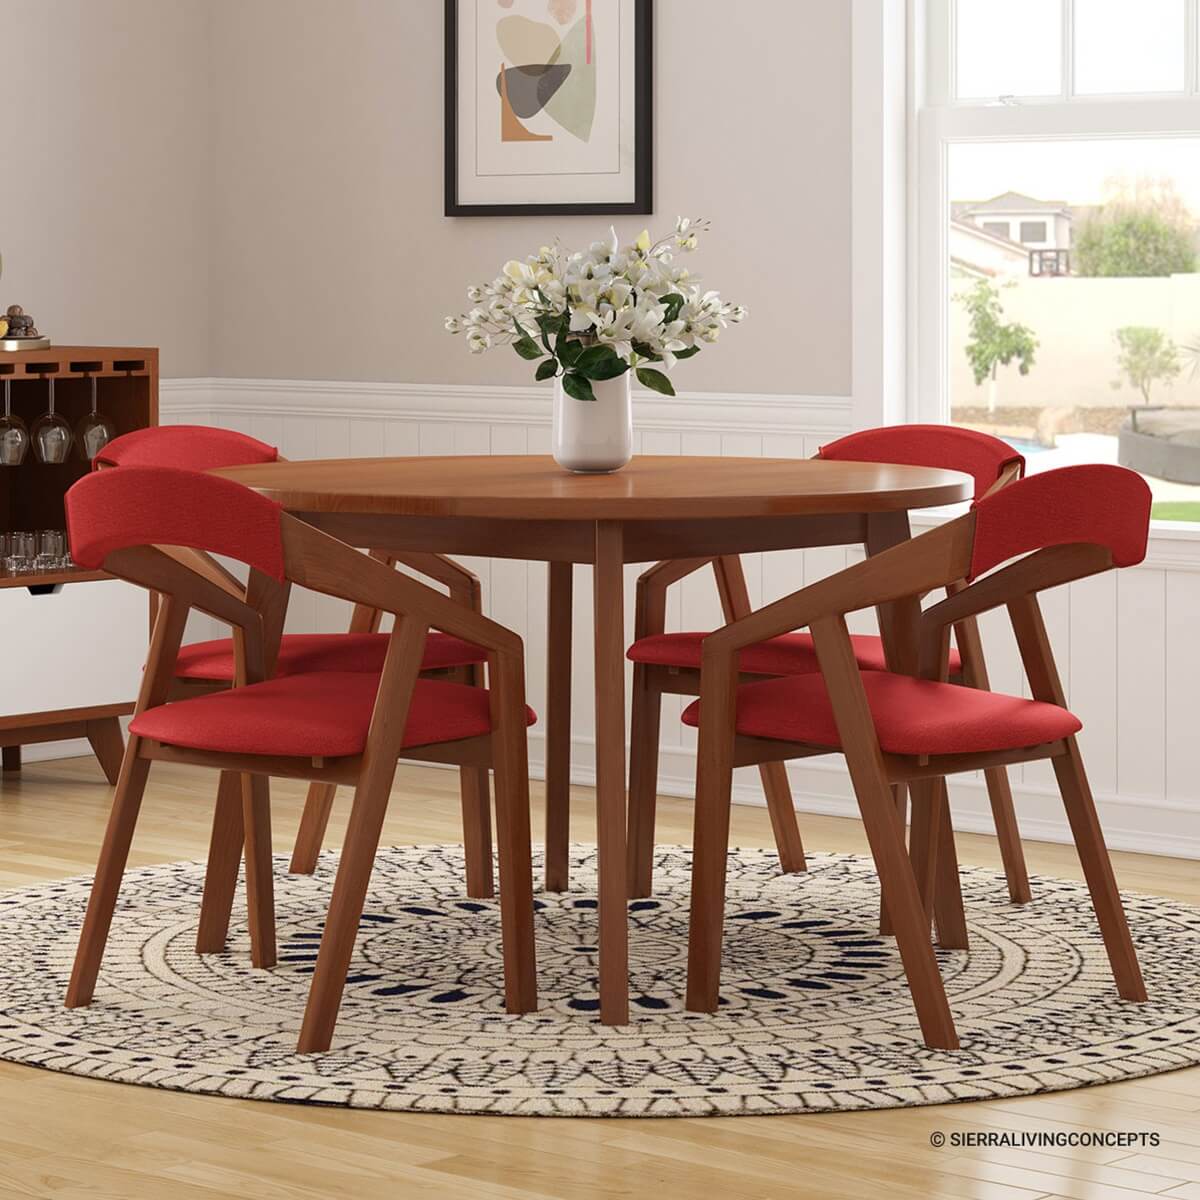 Alamosa Solid Wood 4 Seater Small Round Kitchen Table Chair Set.